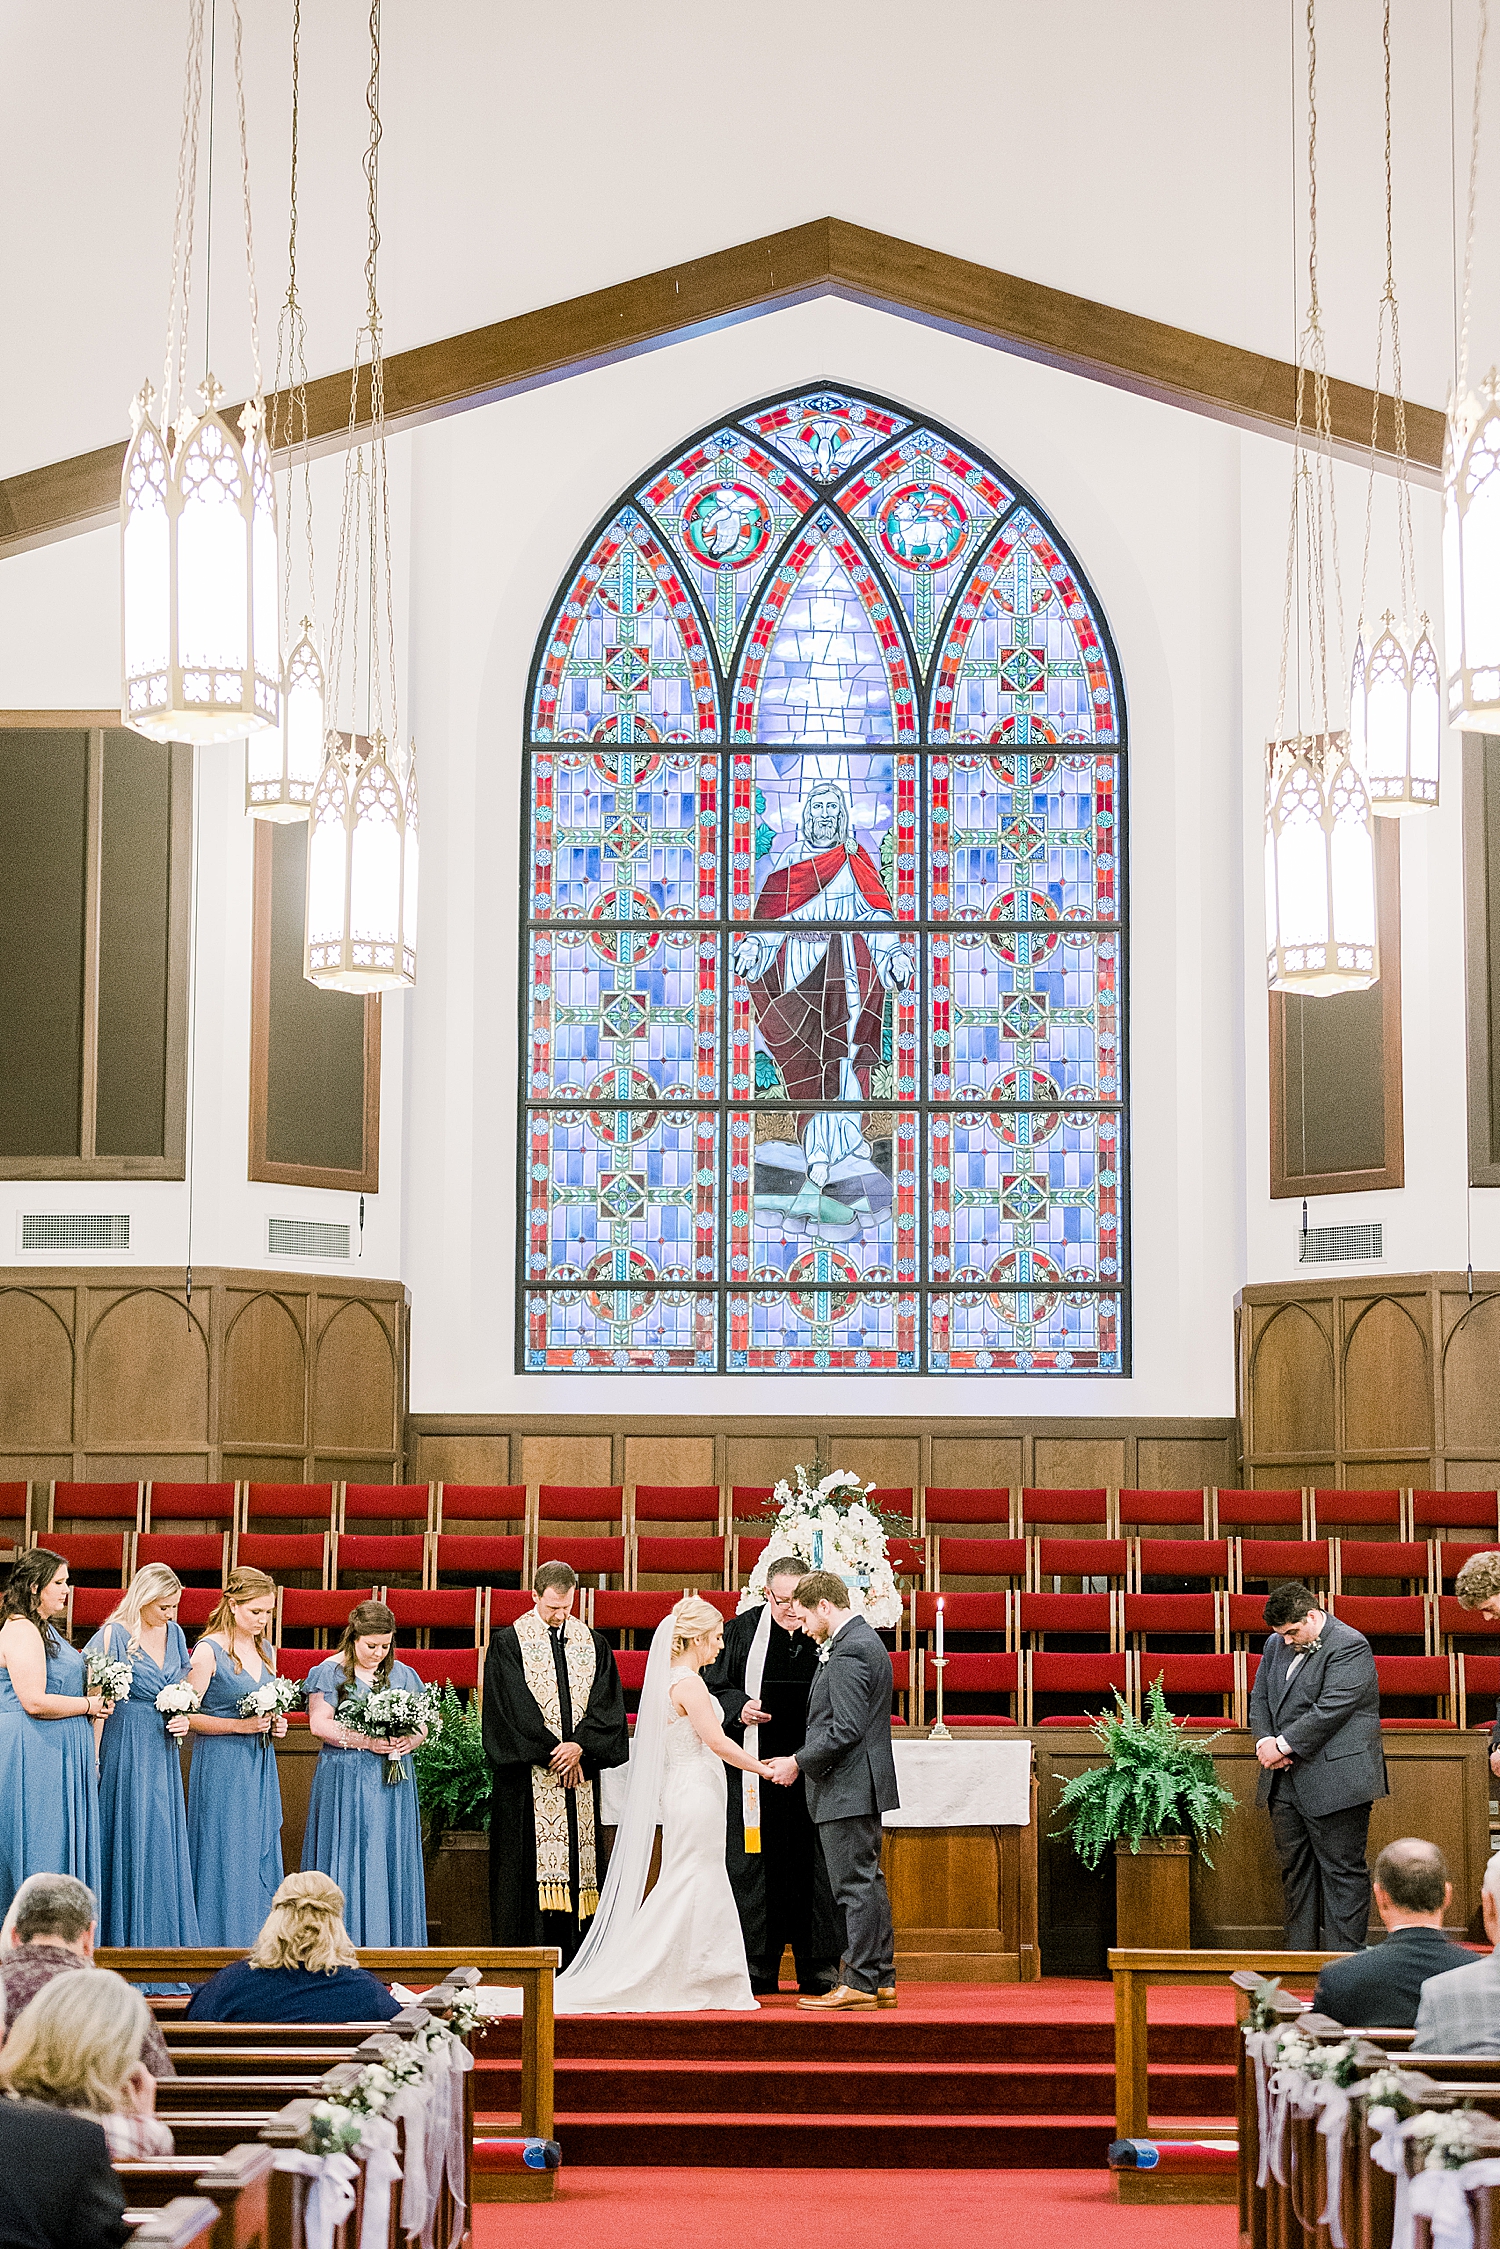 bride and groom pose at alter during traditional church wedding